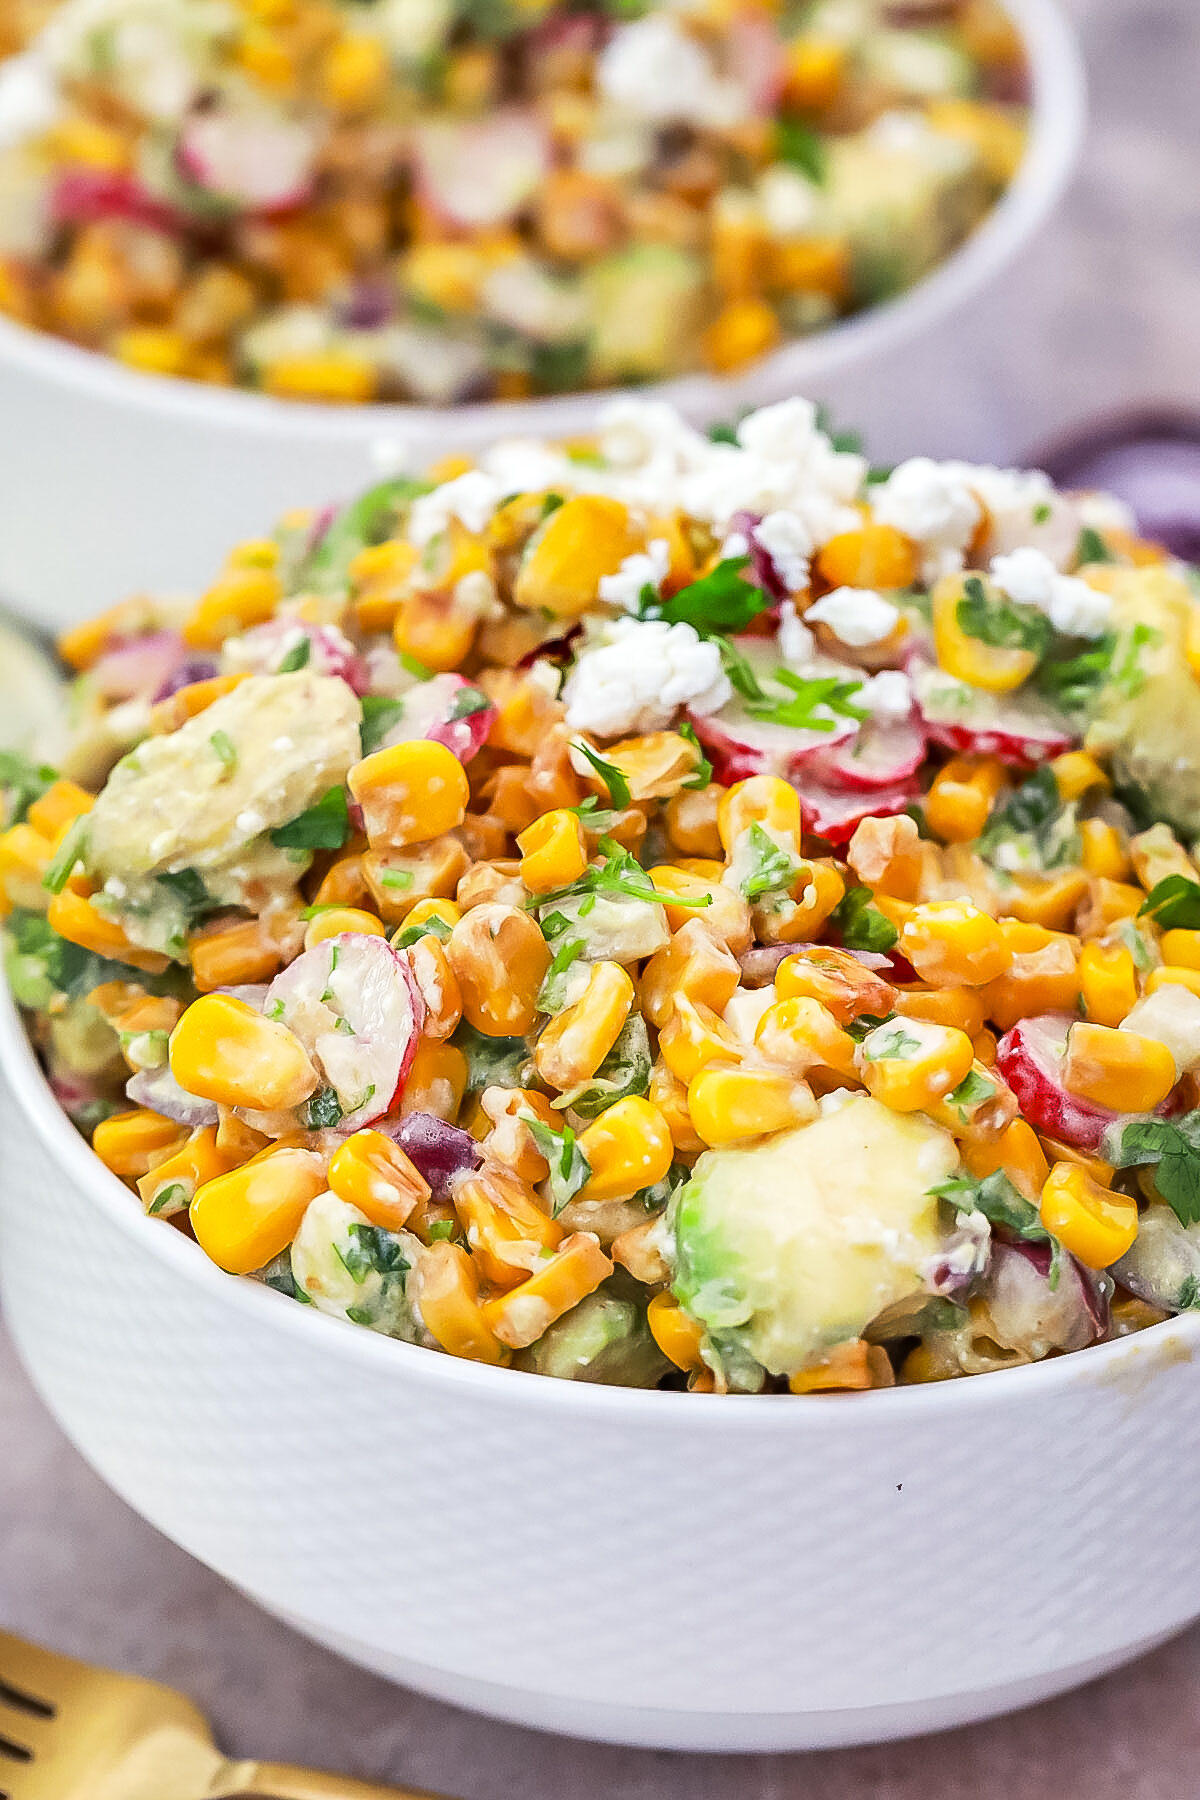 This delicious and easy Mexican Street Corn Salad recipe is perfect for summer potlucks and barbecues! It's easy to make and full of flavour.